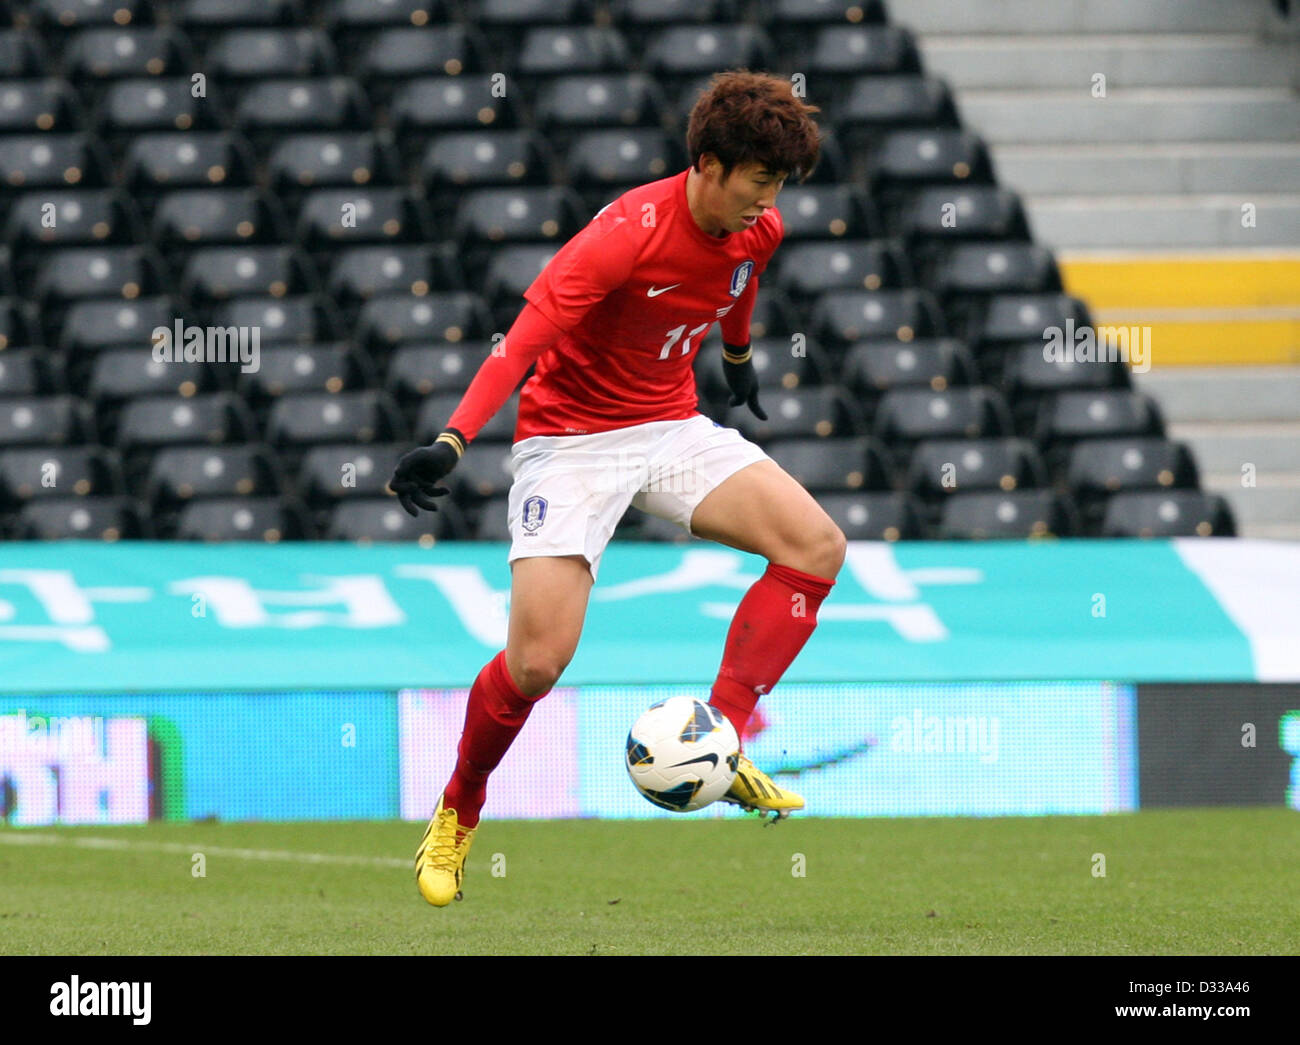 06.02.2013. London, England. South Korea's Koo Ja-Cheol  in action during International Friendly game between Croatia and South Korea from Craven Cottage Stock Photo